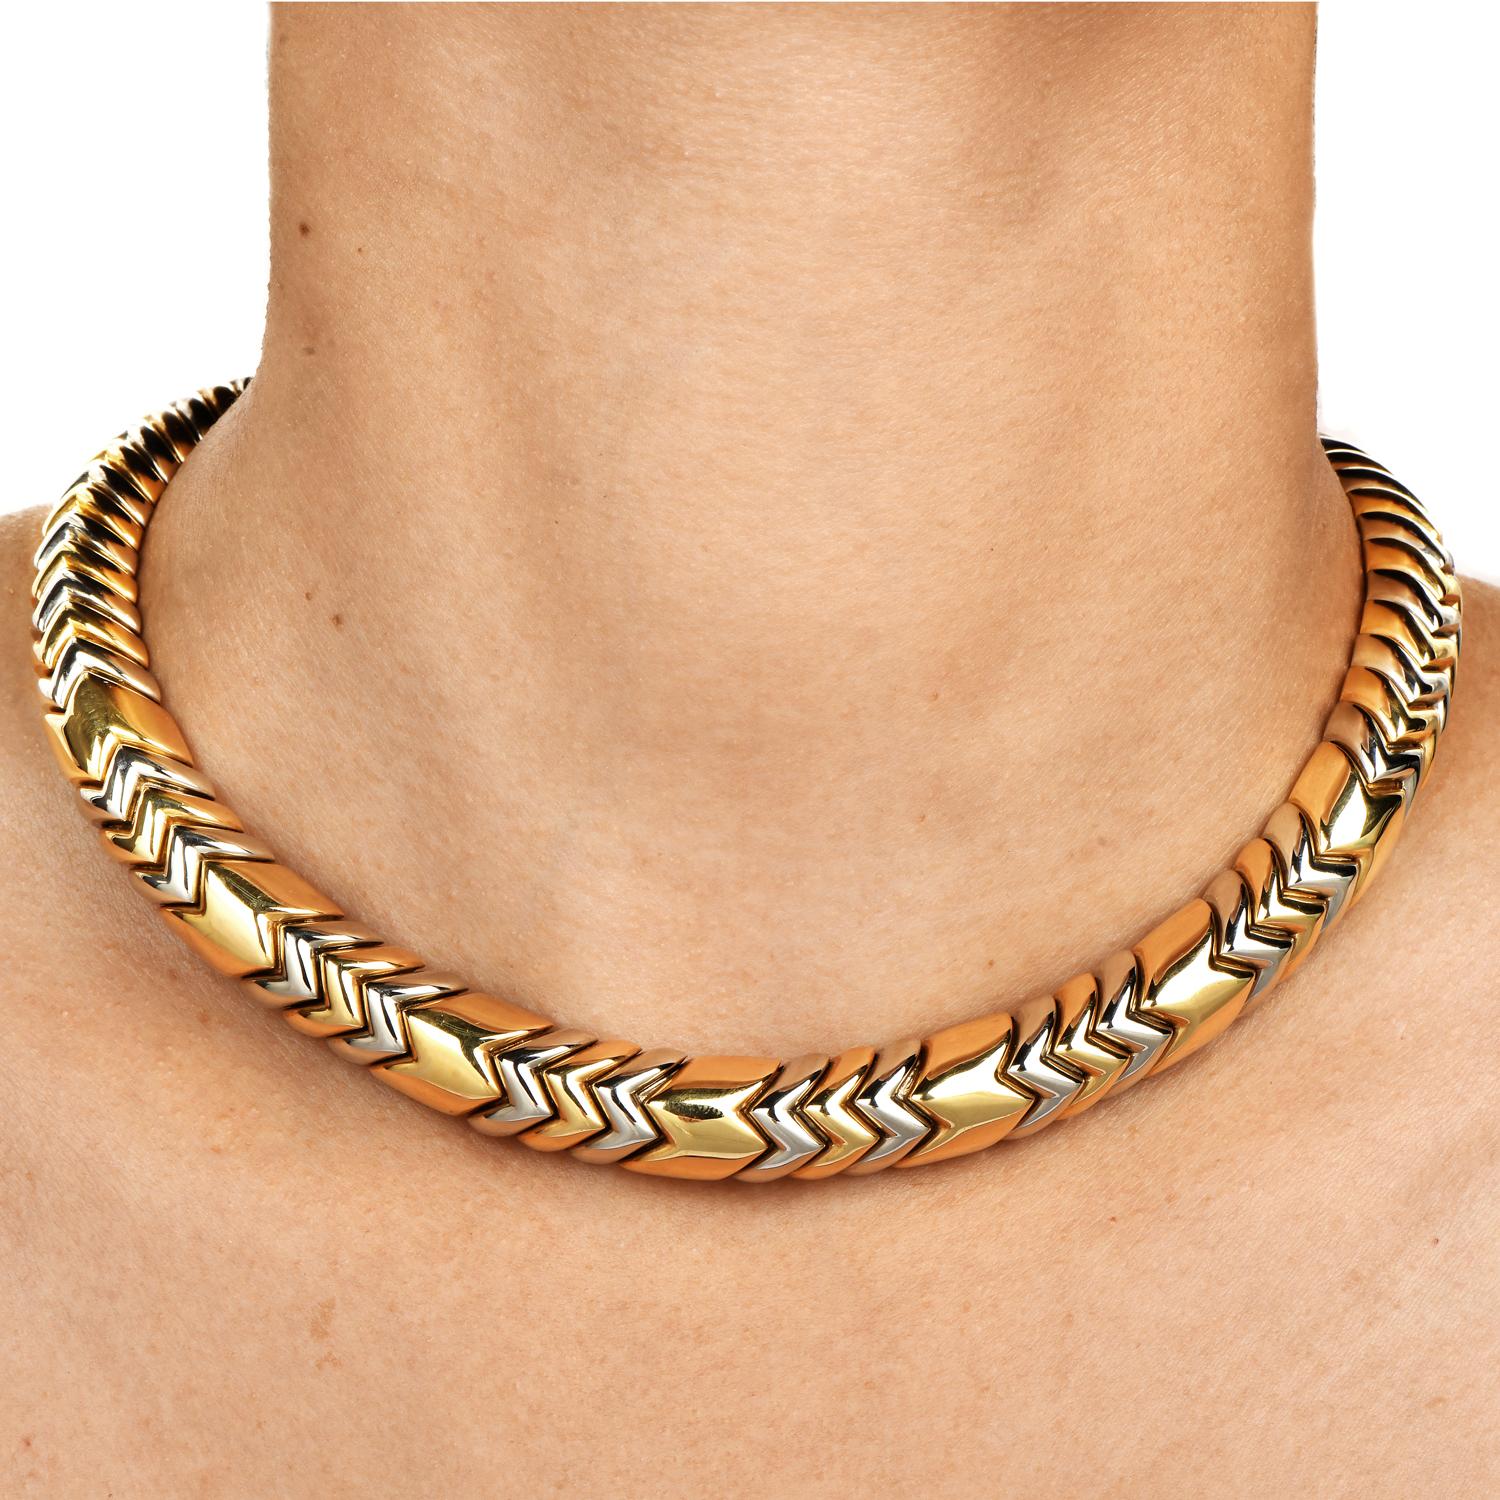 An exquisite Italian-made Bvlgari Spiga 18K Yellow Gold collar link necklace.

Completely crafted in 18K Yellow & White Gold.

The necklace is 15